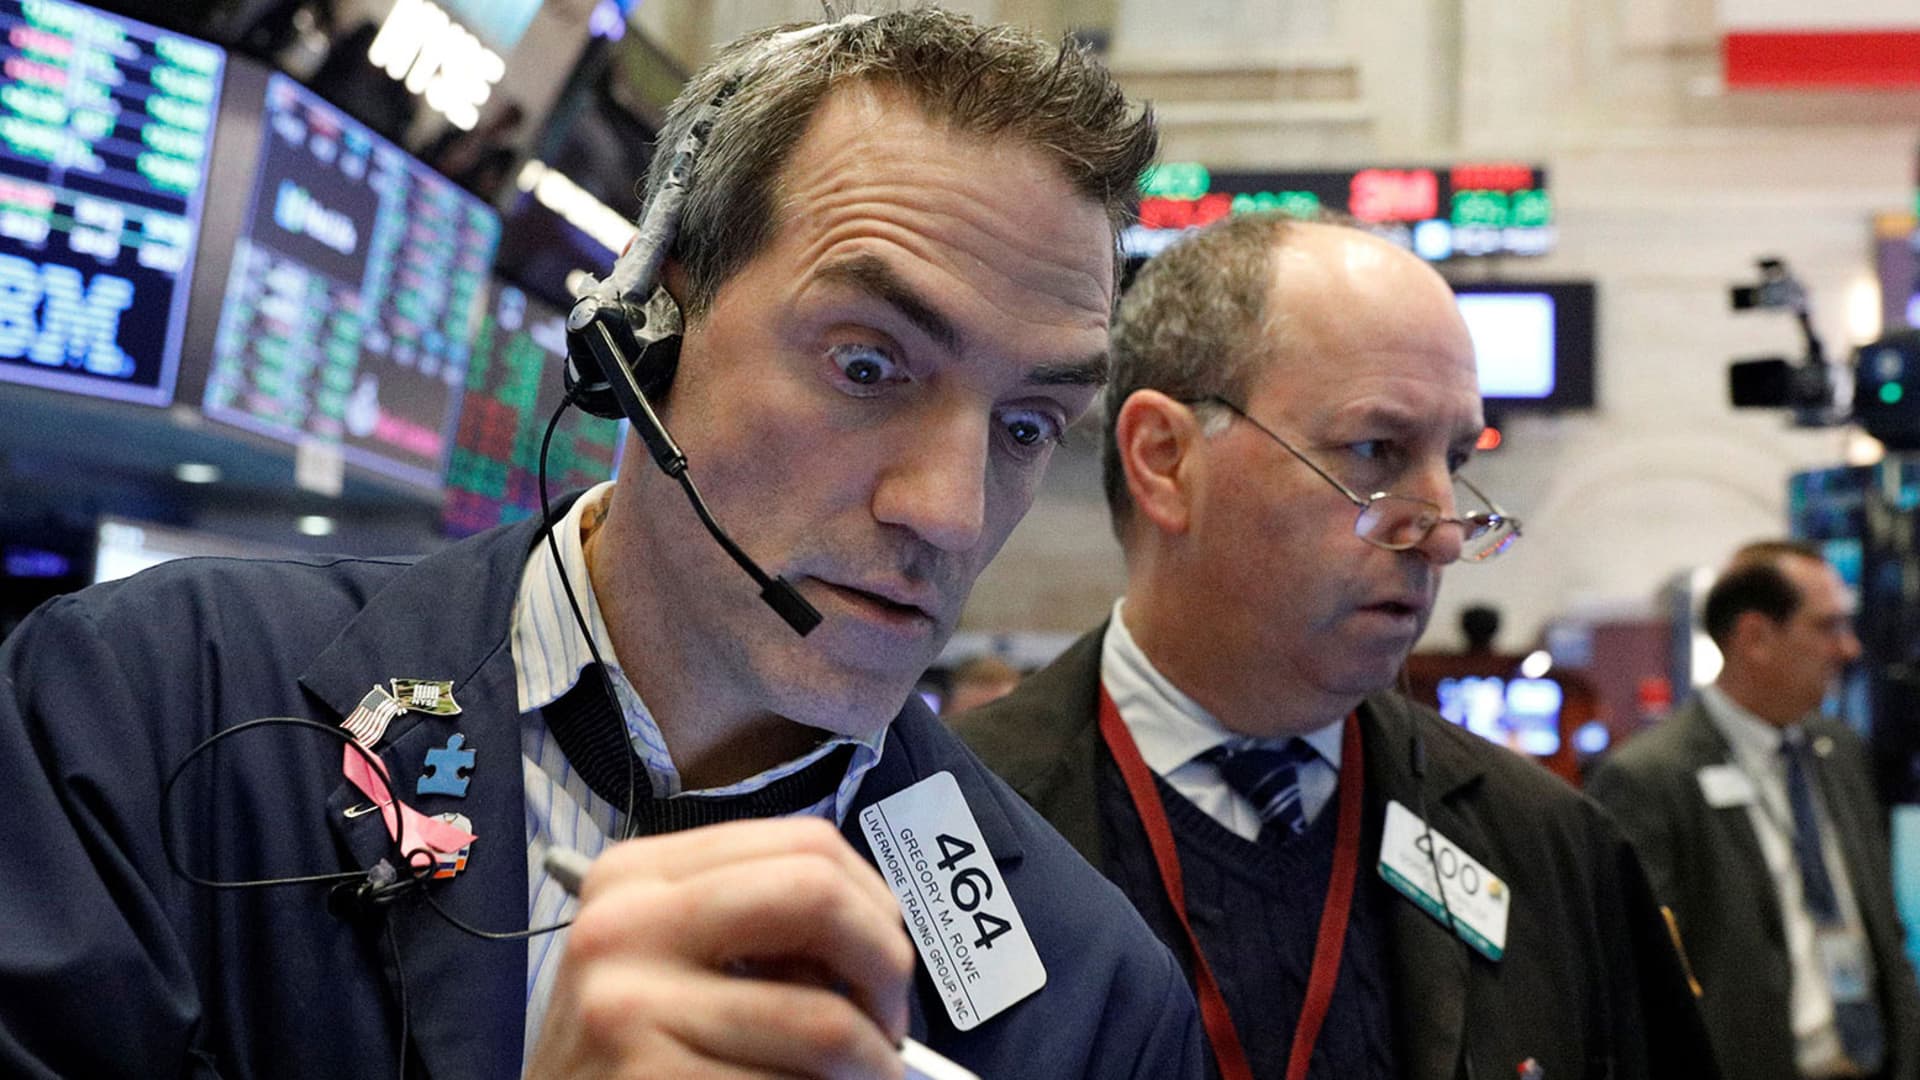 Investment bank says buy defense stocks, brace for $100 oil and 10% stock market correction